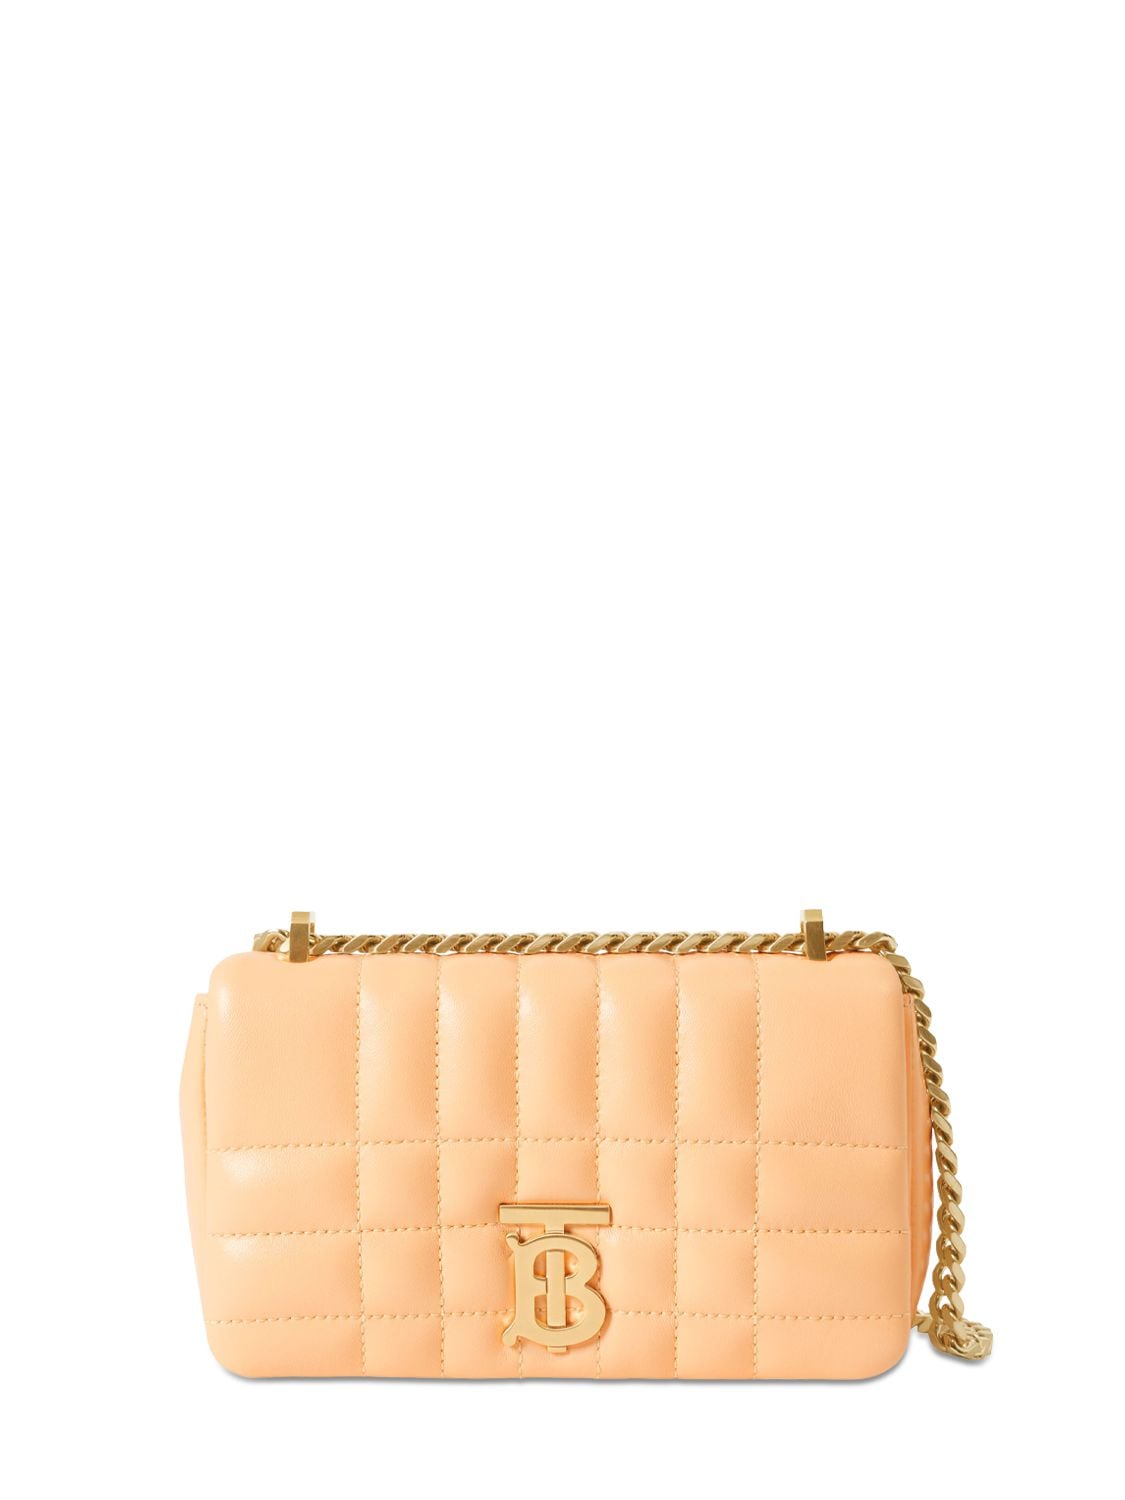 Burberry Mini Lola Quilted Leather Shoulder Bag In Golde Sand